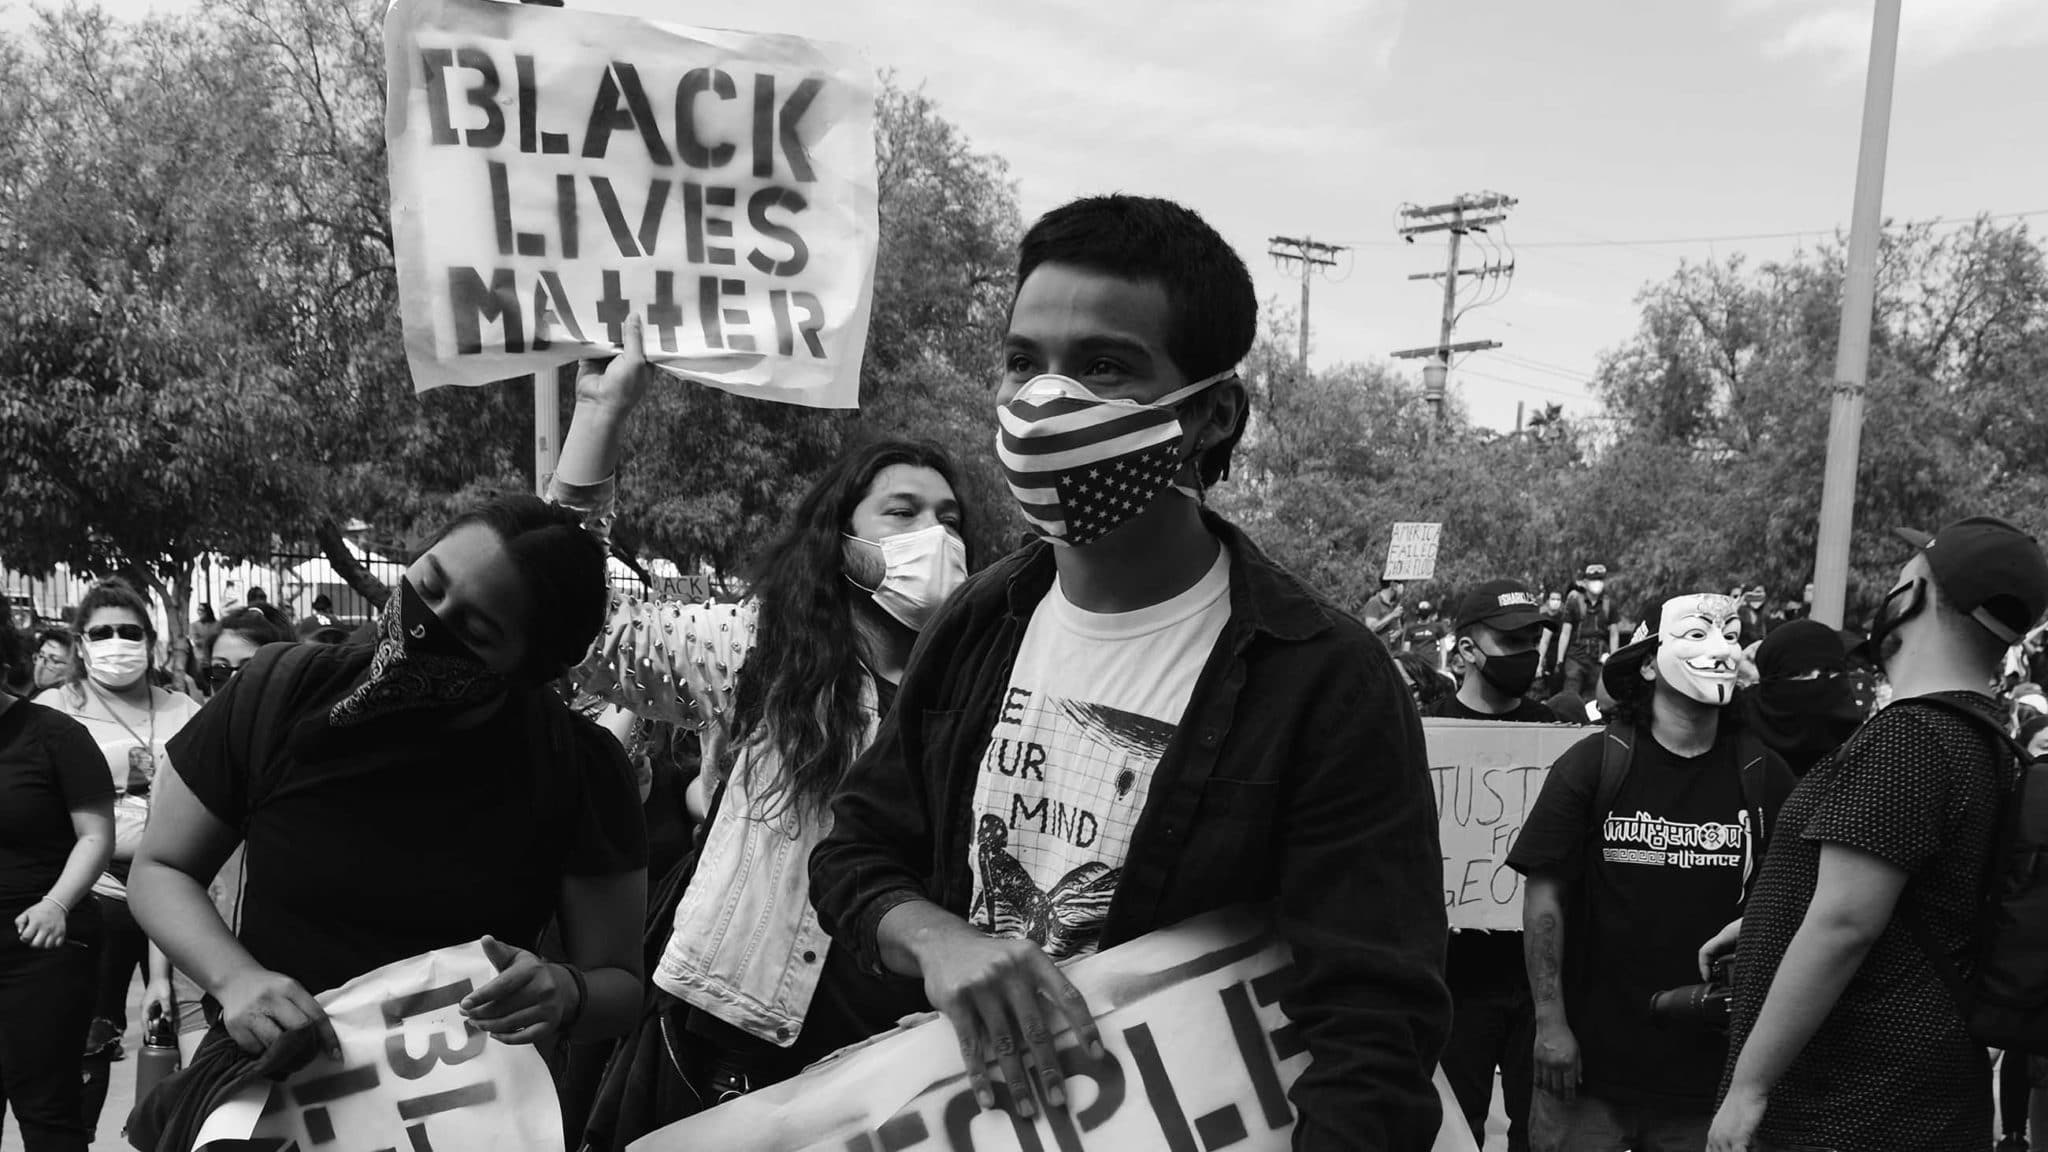 A group of Black Lives Matter protesters holding signs and wearing masks to protect from Covid-19.